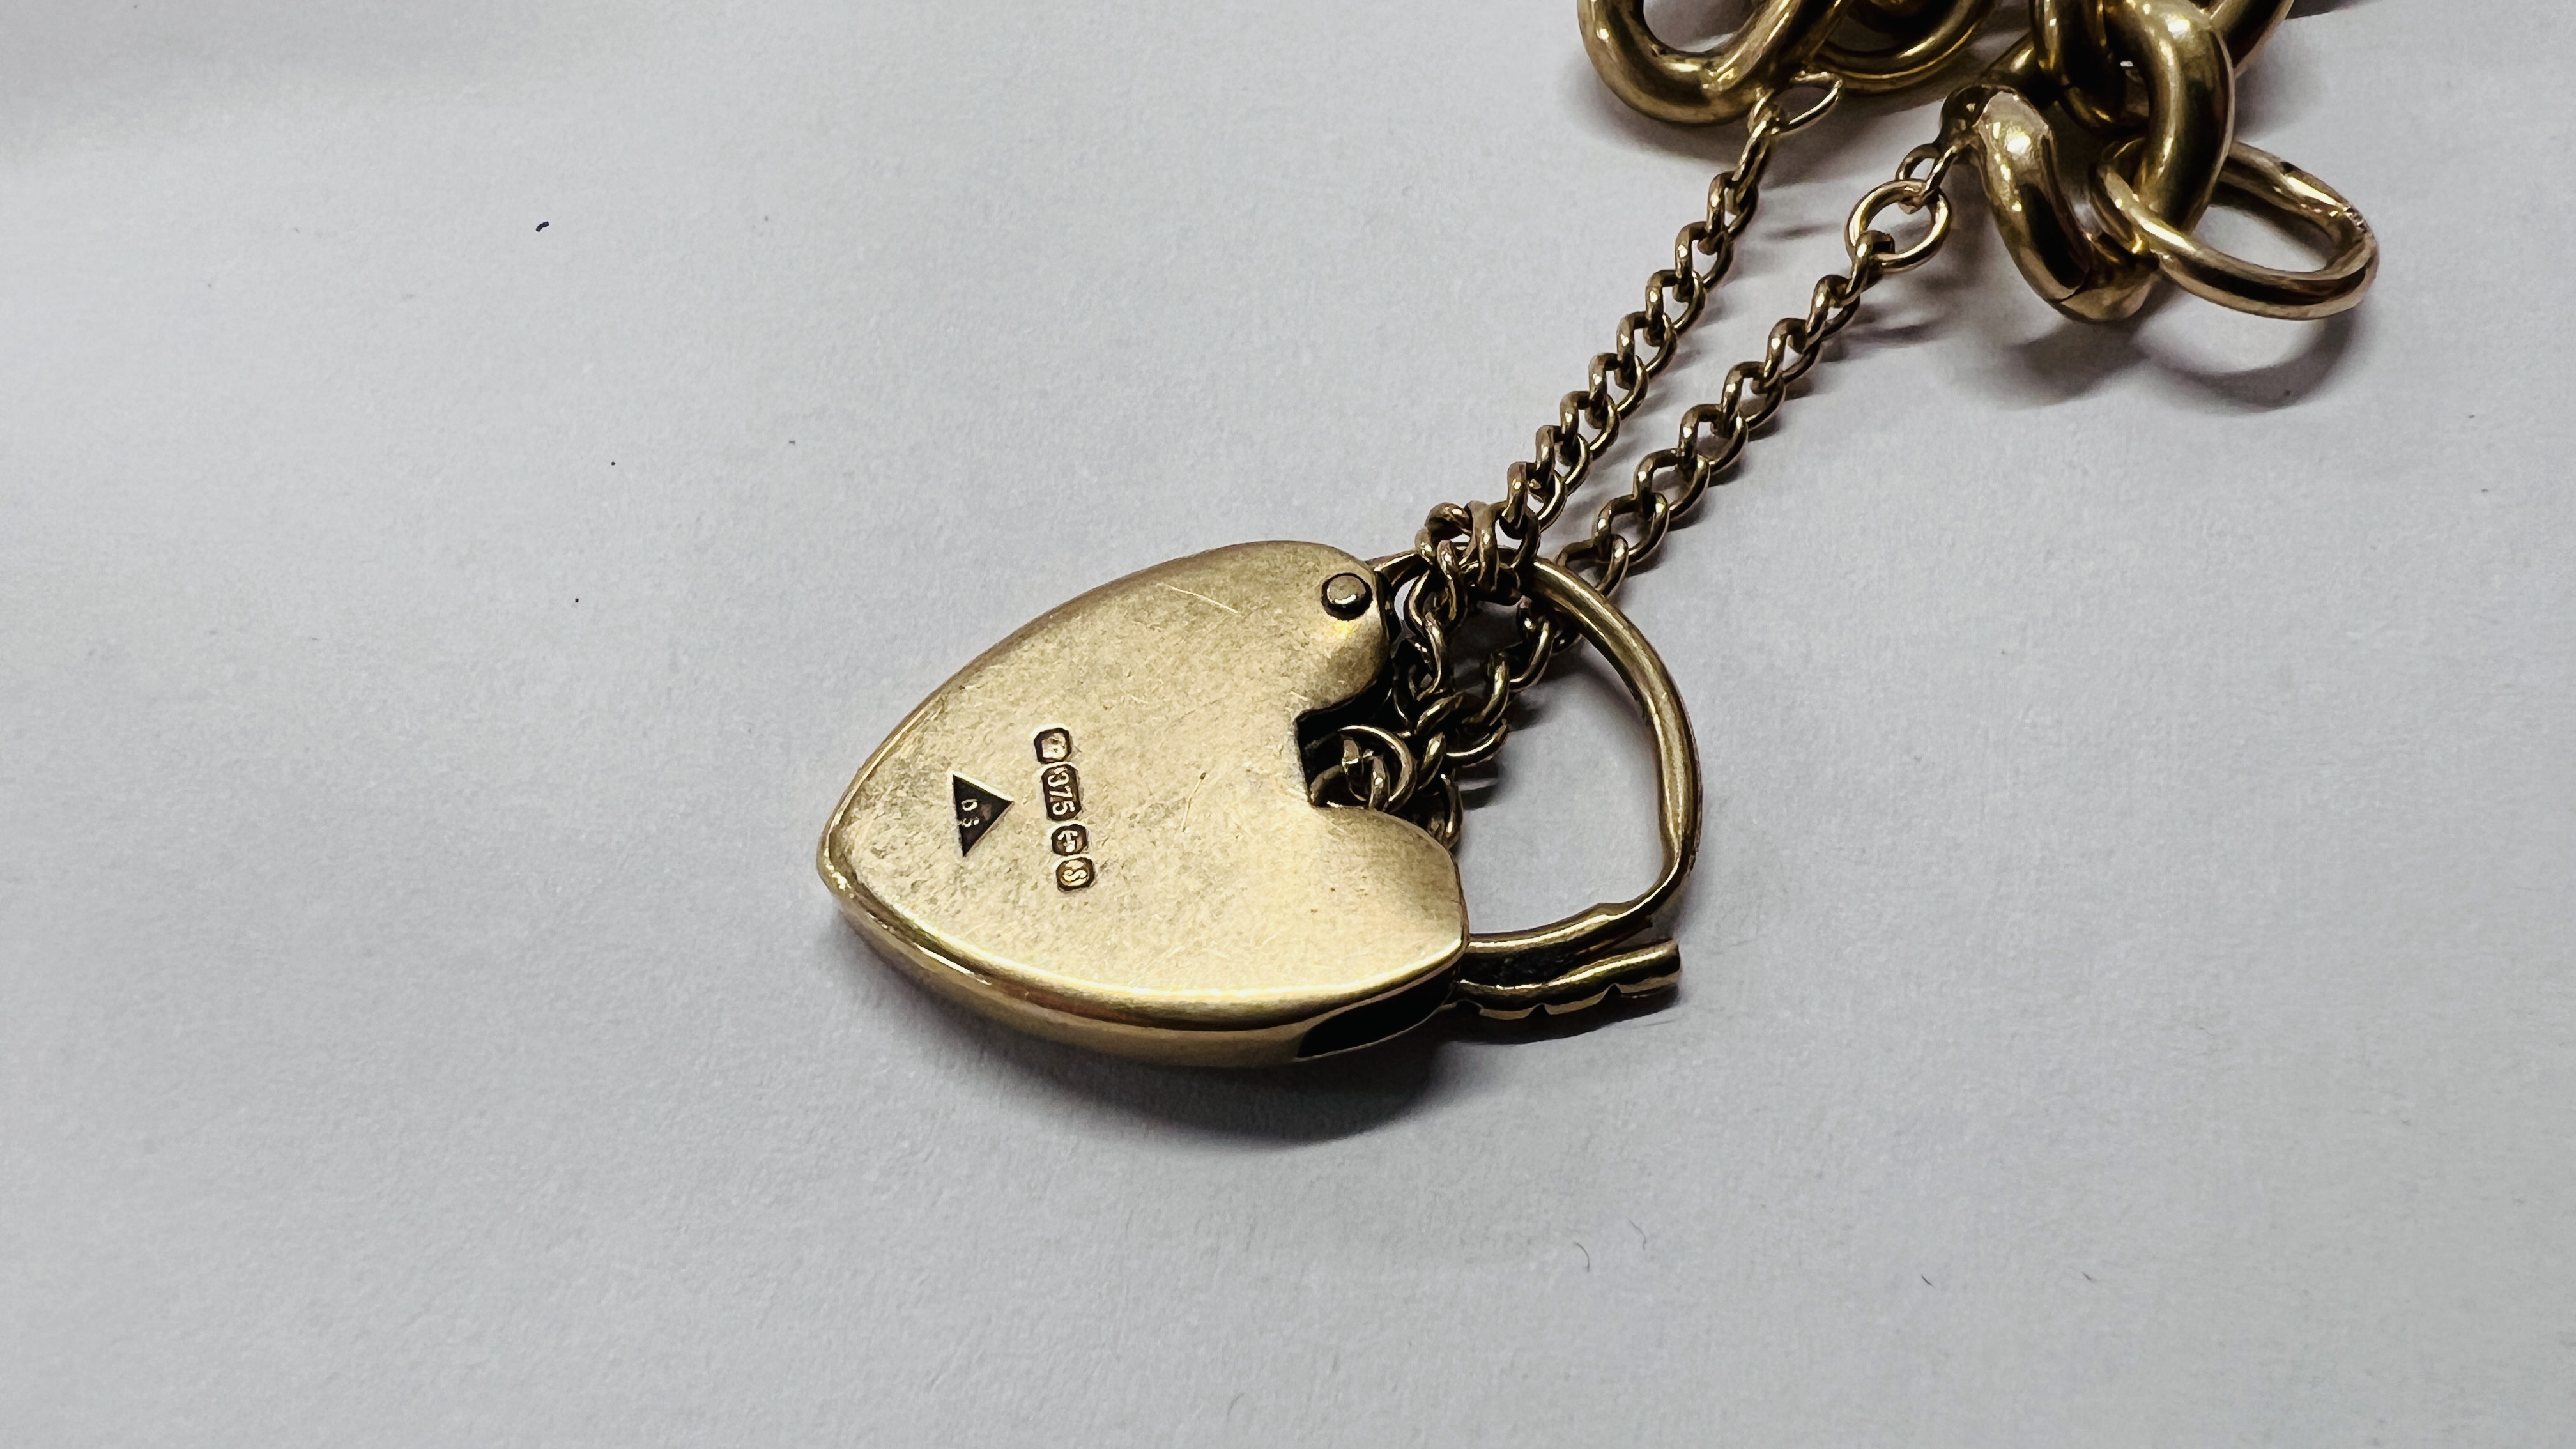 A 9CT GOLD BRACELET WITH PADLOCK CLASP. - Image 6 of 8